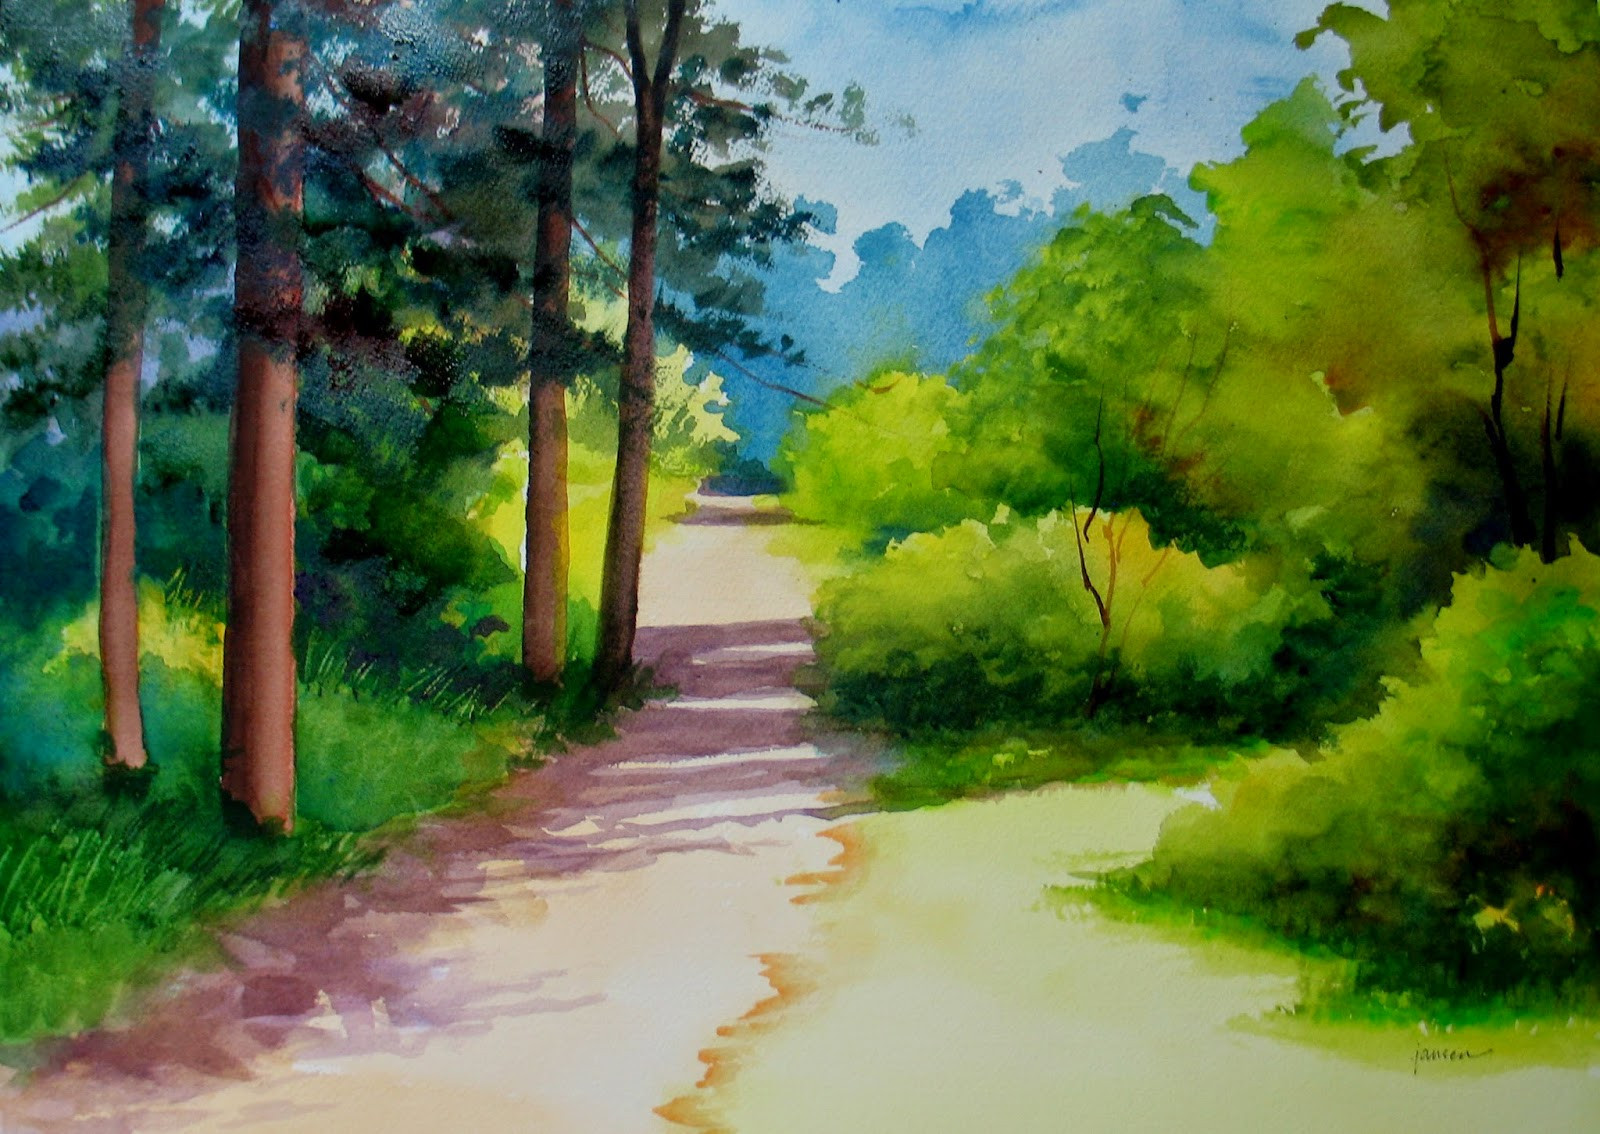 Landscape Painting Ideas
 Nel s Everyday Painting Watercolor Landscape SOLD